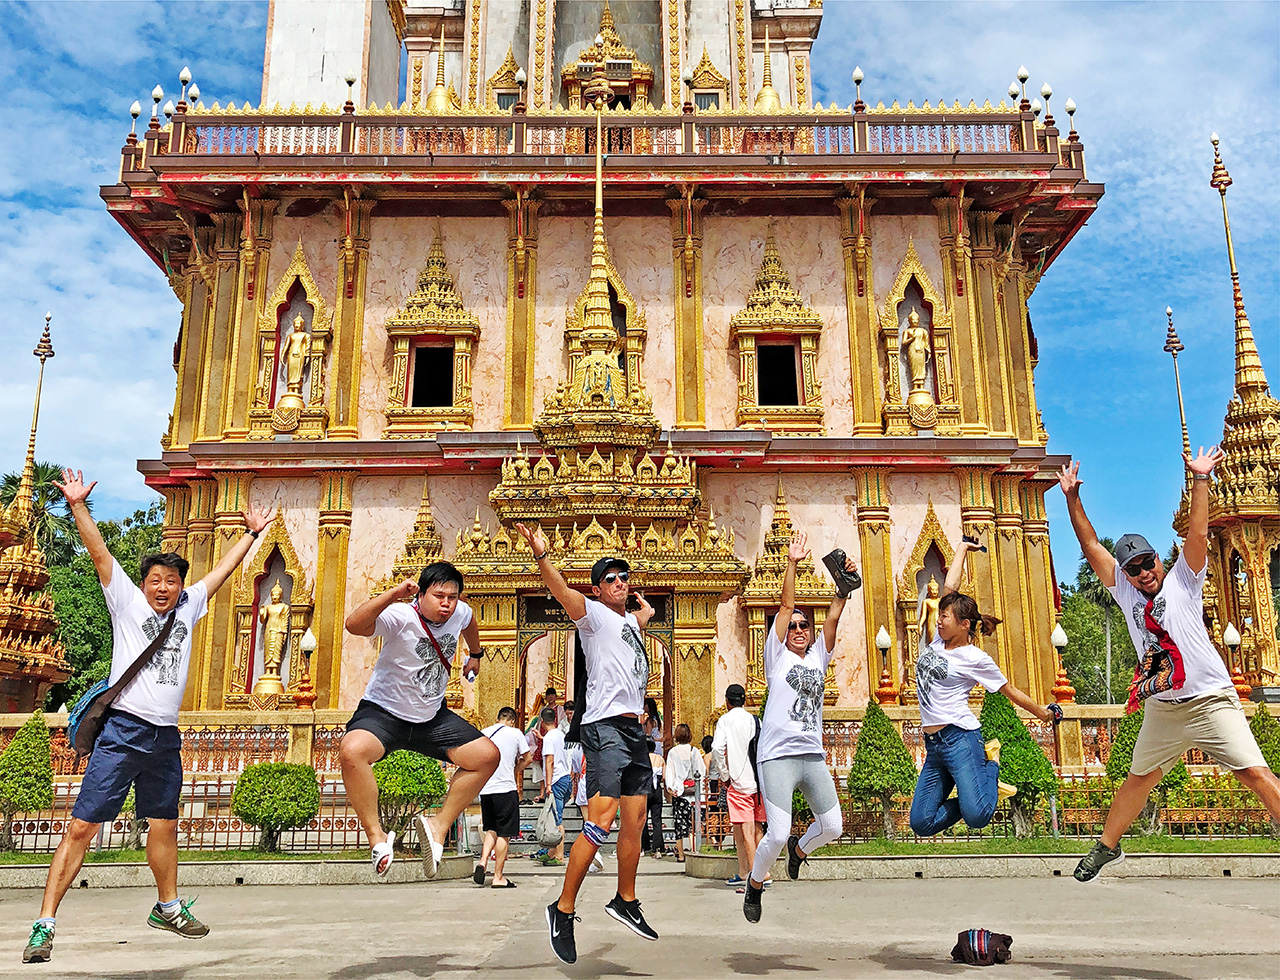 A team of people doing a jump shot group photo in front of an iconic temple in Phuket